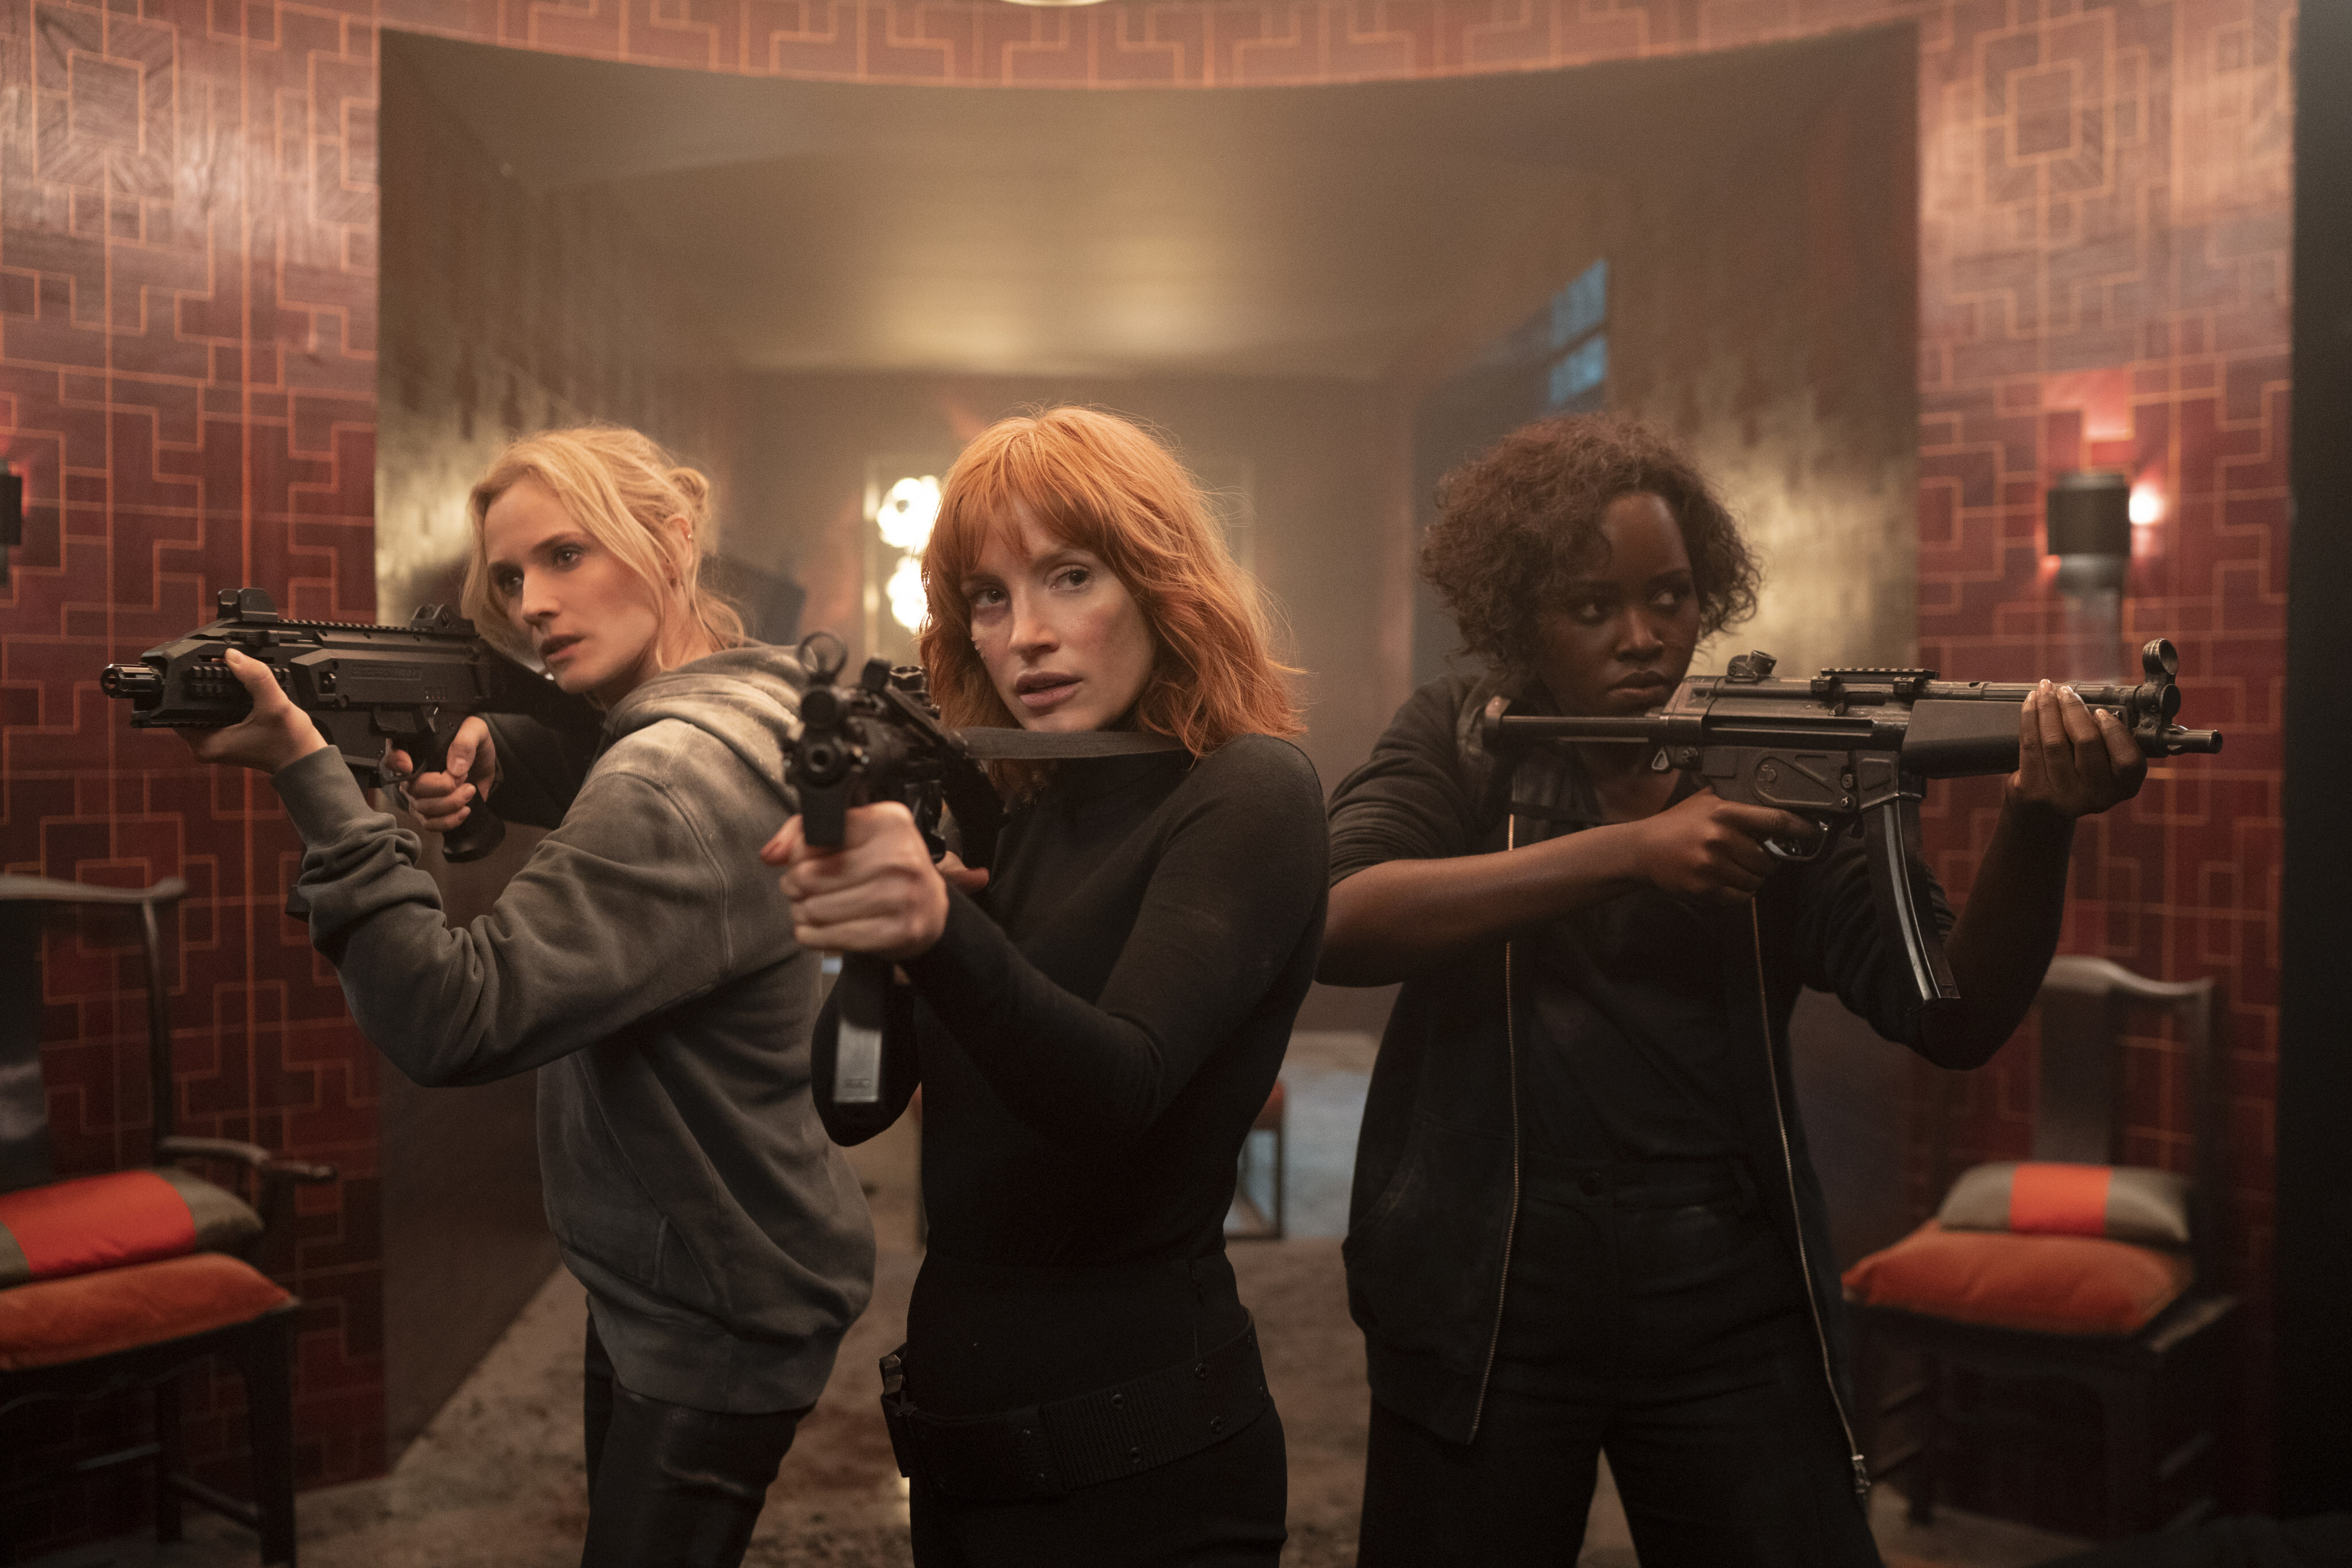 (From left) Diane Kruger, Jessica Chastain and Lupita Nyong’o in a still from The 355, co-written and directed by Simon Kinberg.